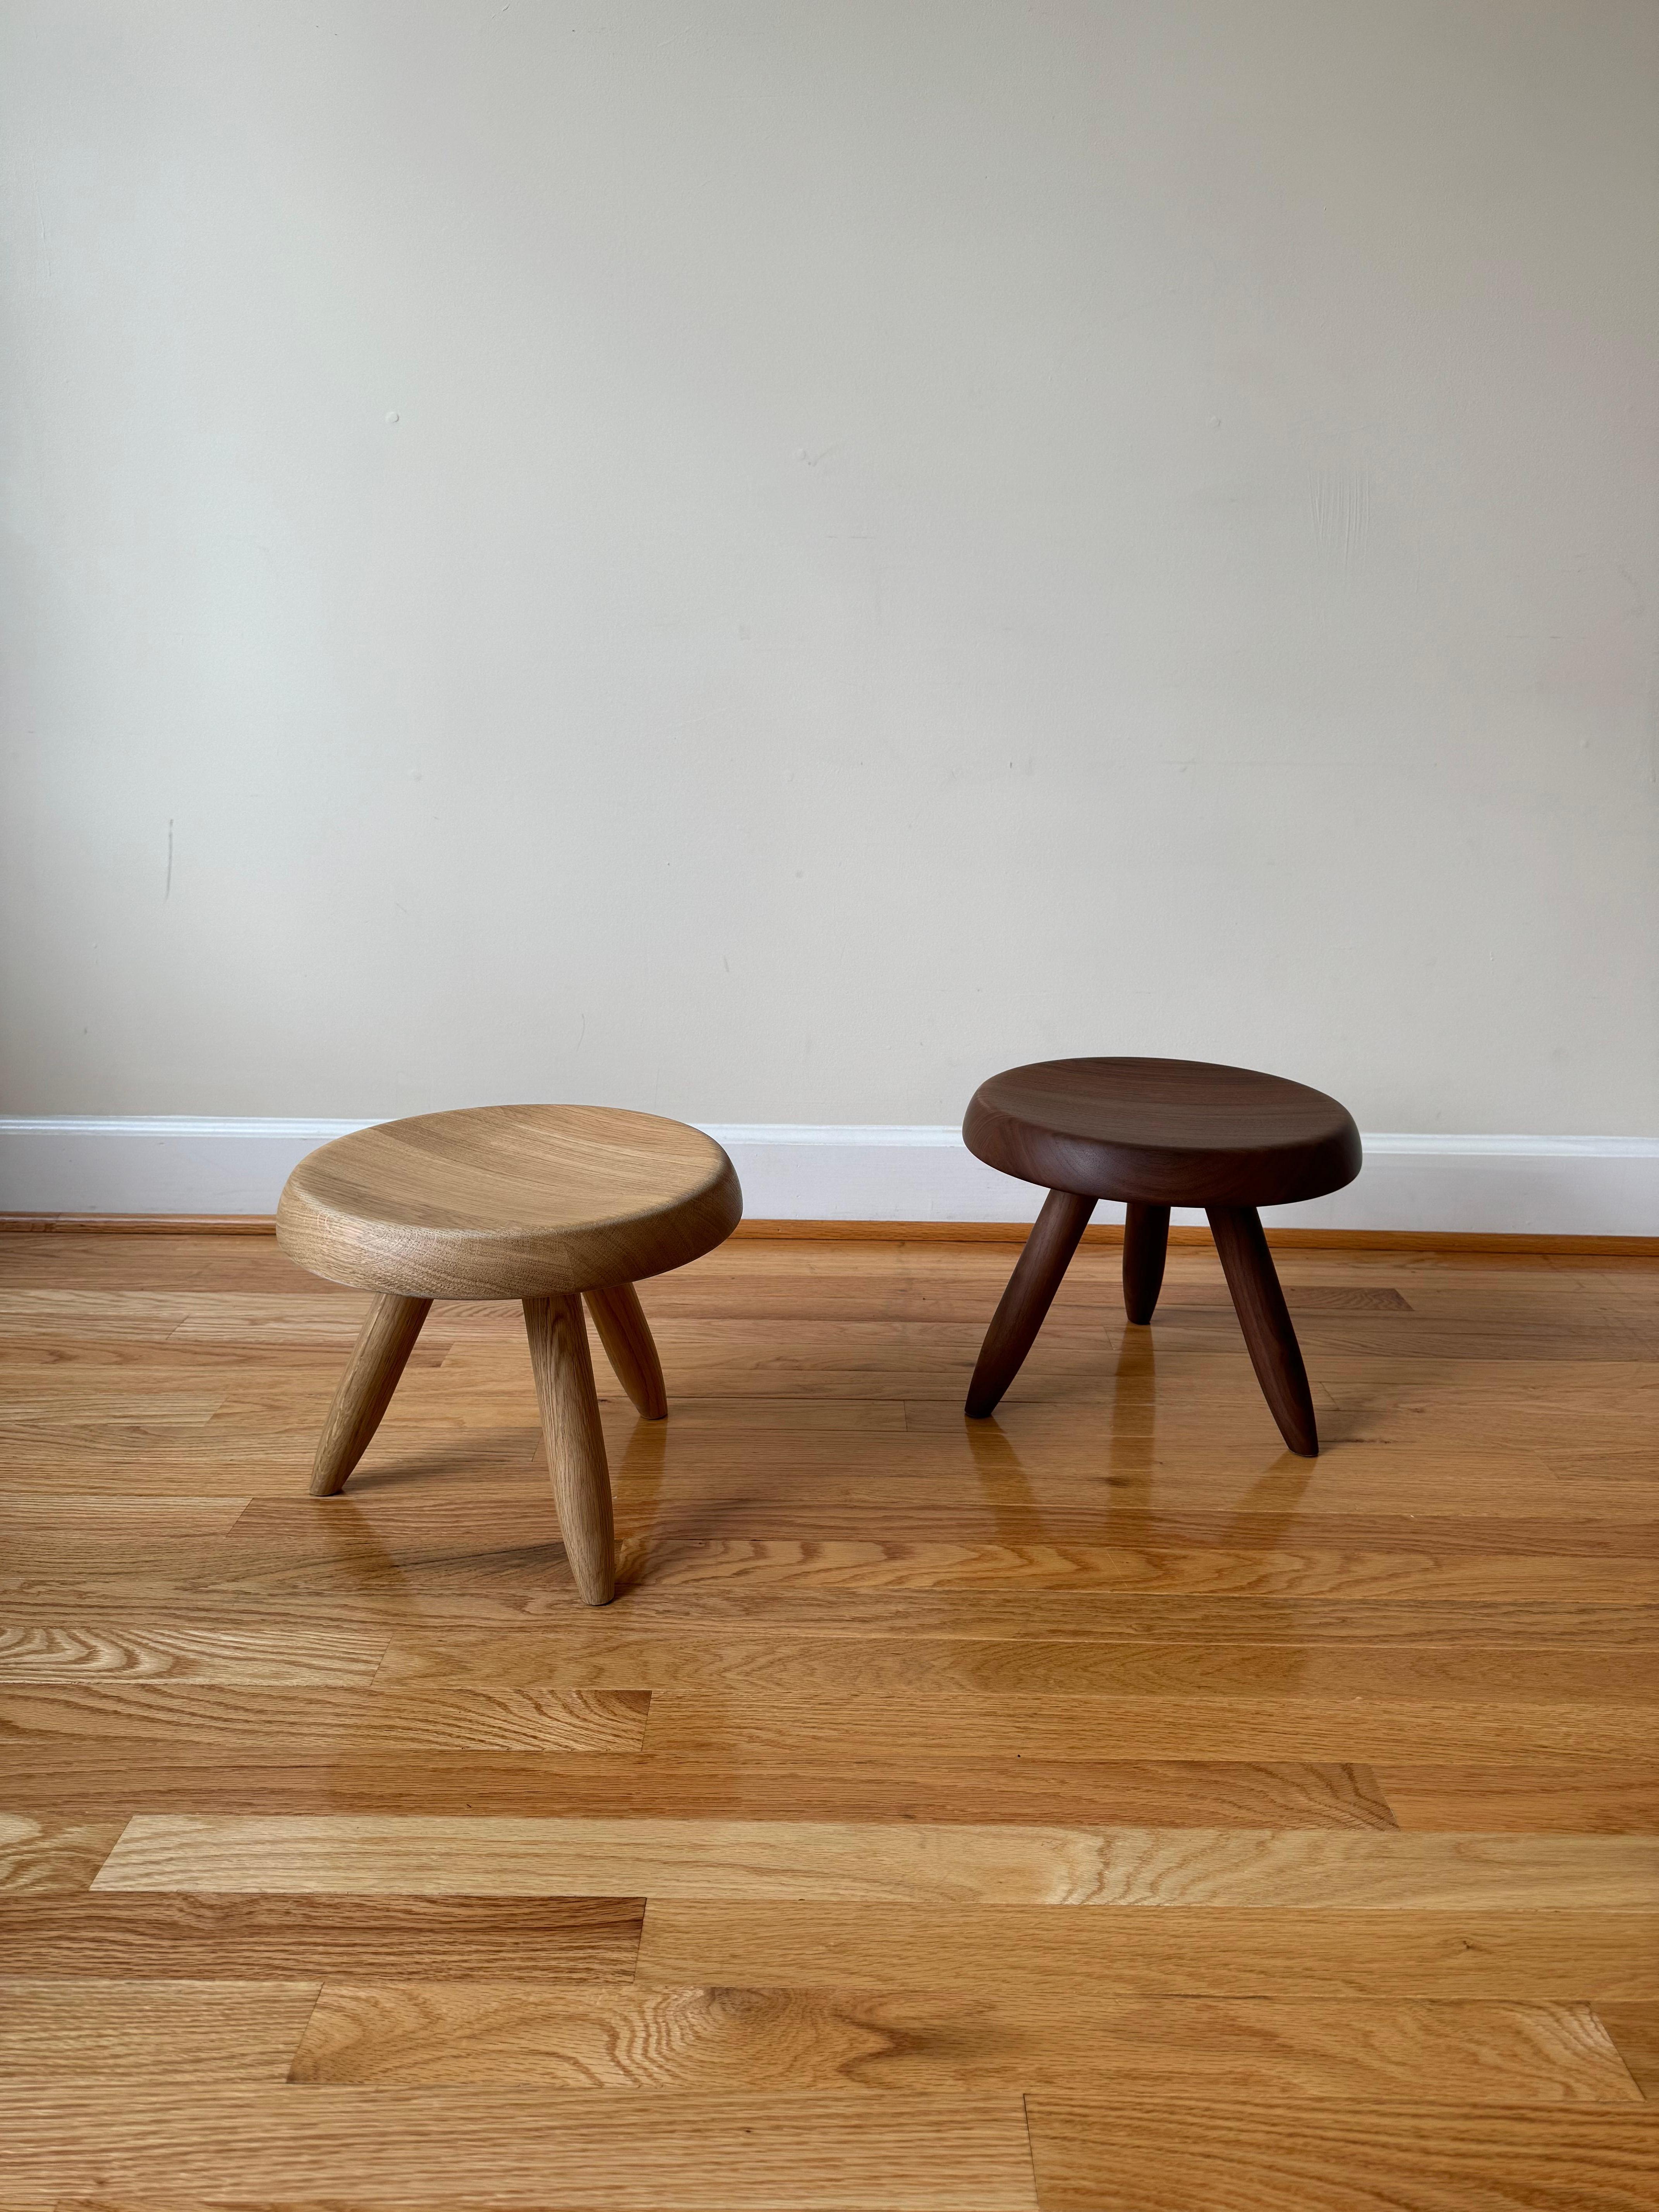 Tabouret Berger (Berger Stool) by Charlotte Perriand for Cassina For Sale 5